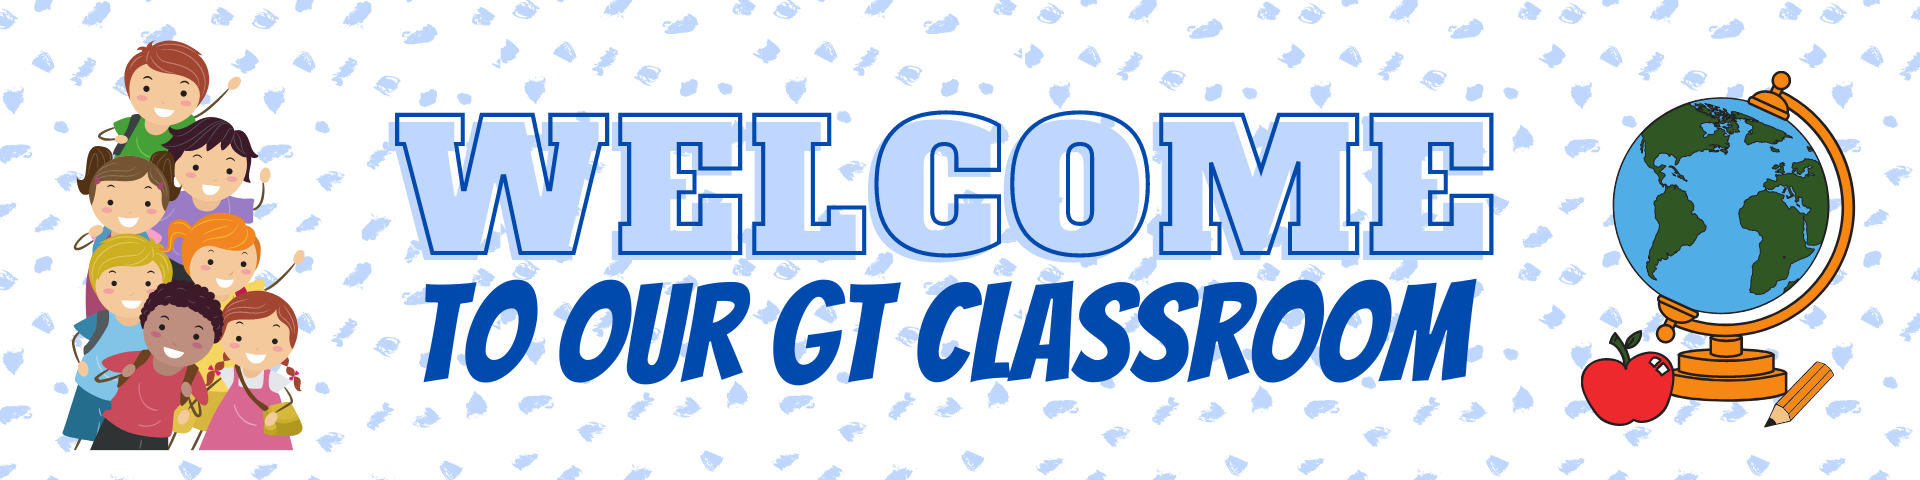 Welcome to GT Banner